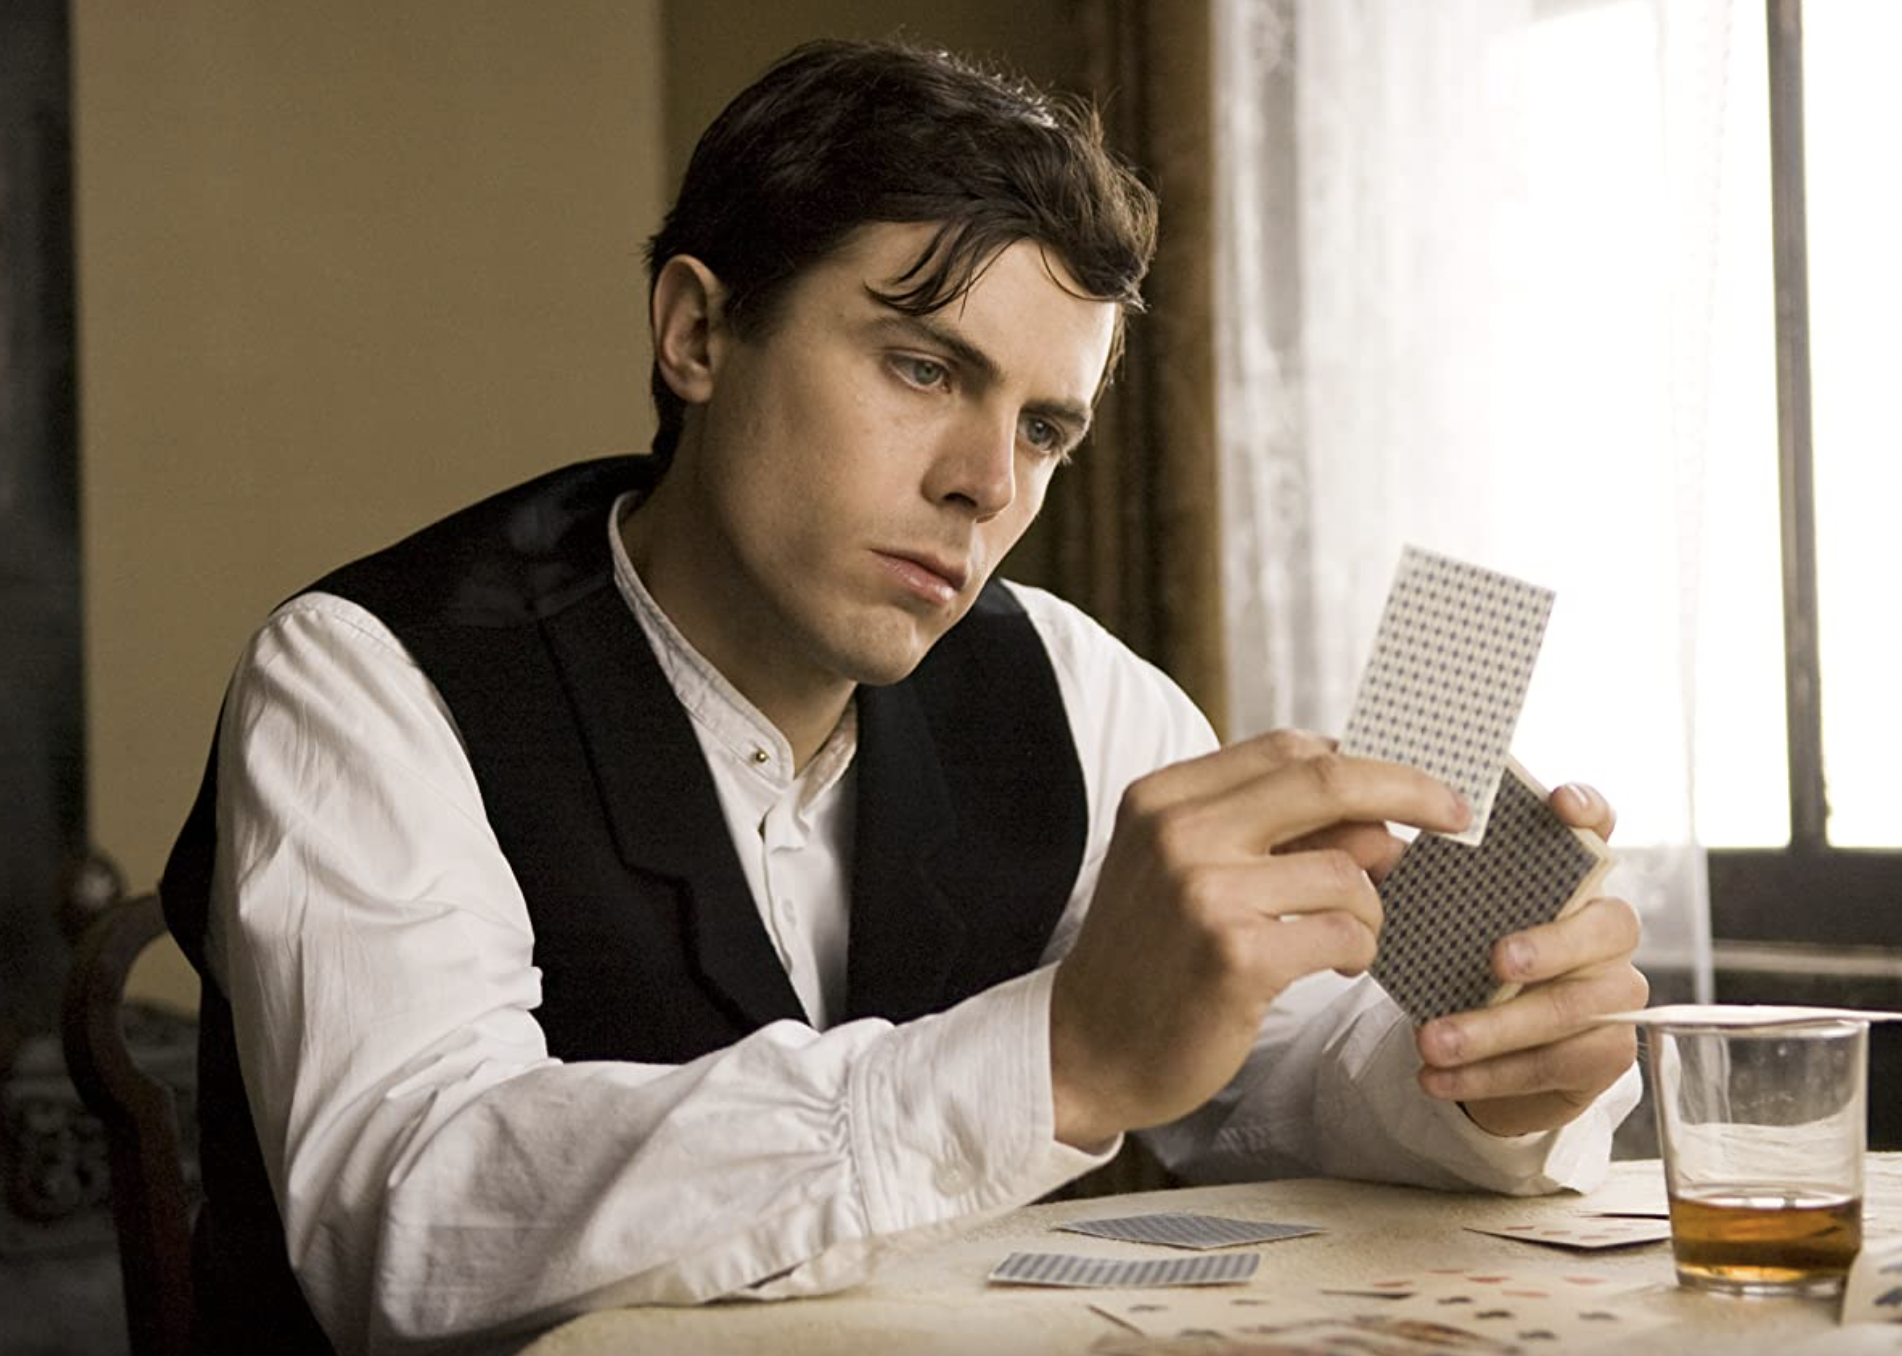 Casey Affleck in "The Assassination of Jesse James by the Coward Robert Ford".